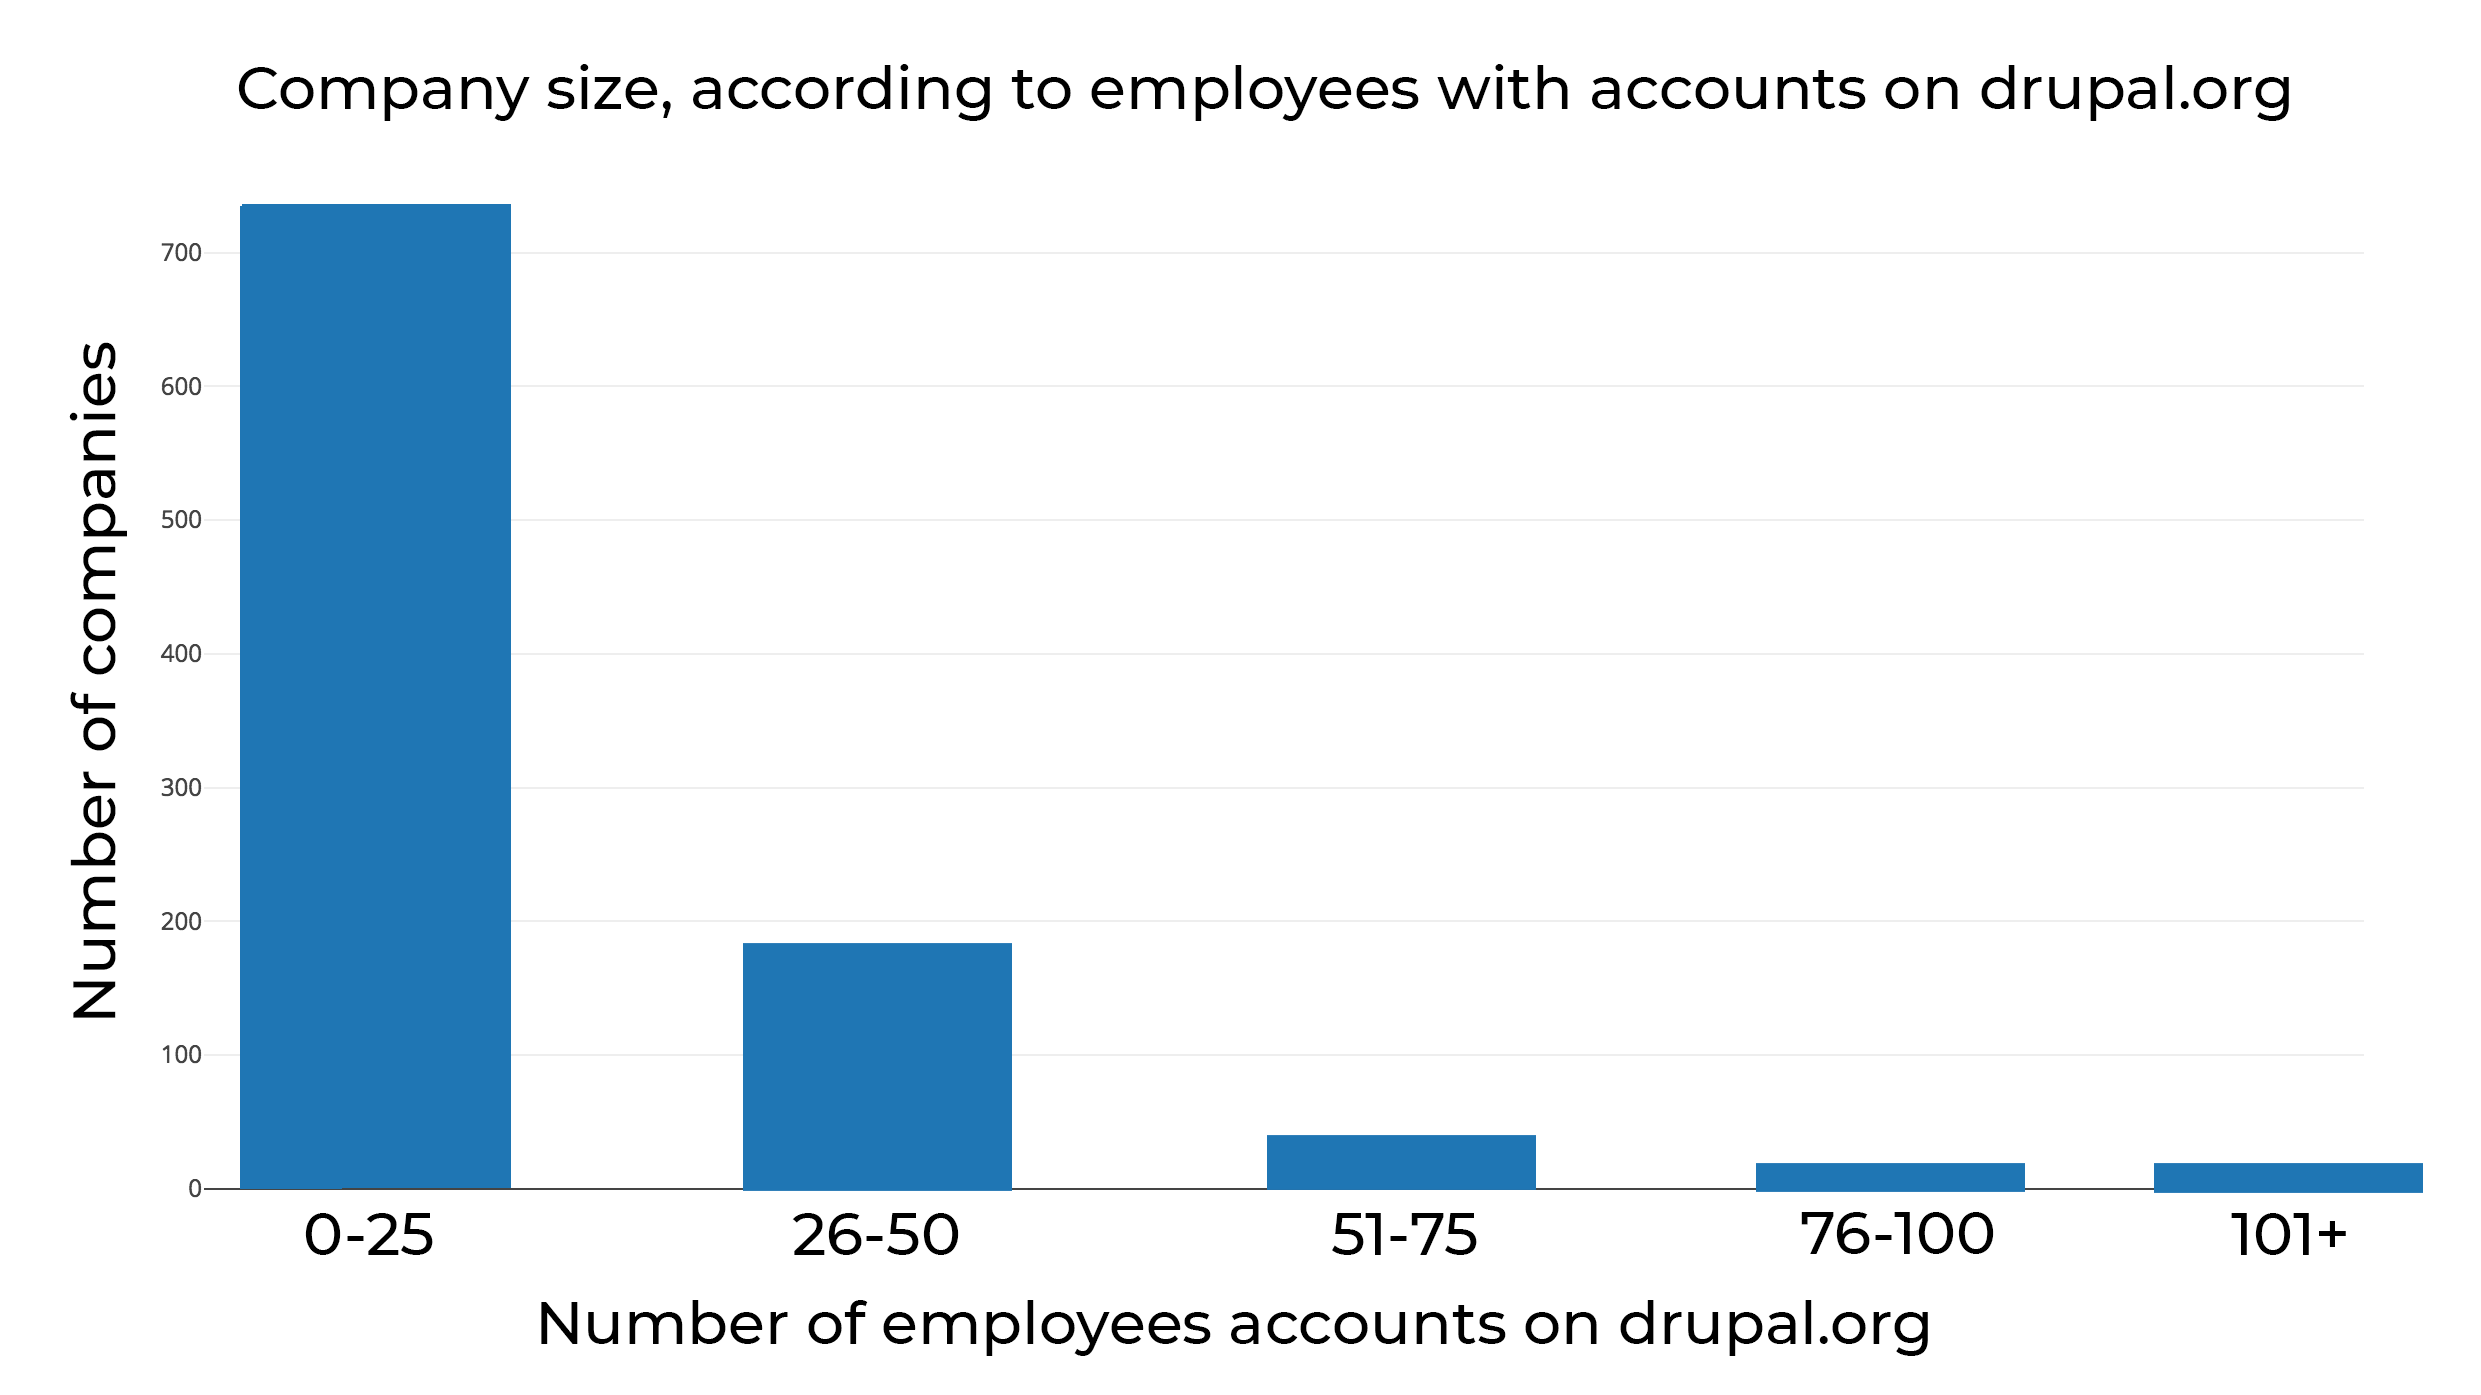 company numbers according to employees with accounts on drupal.org